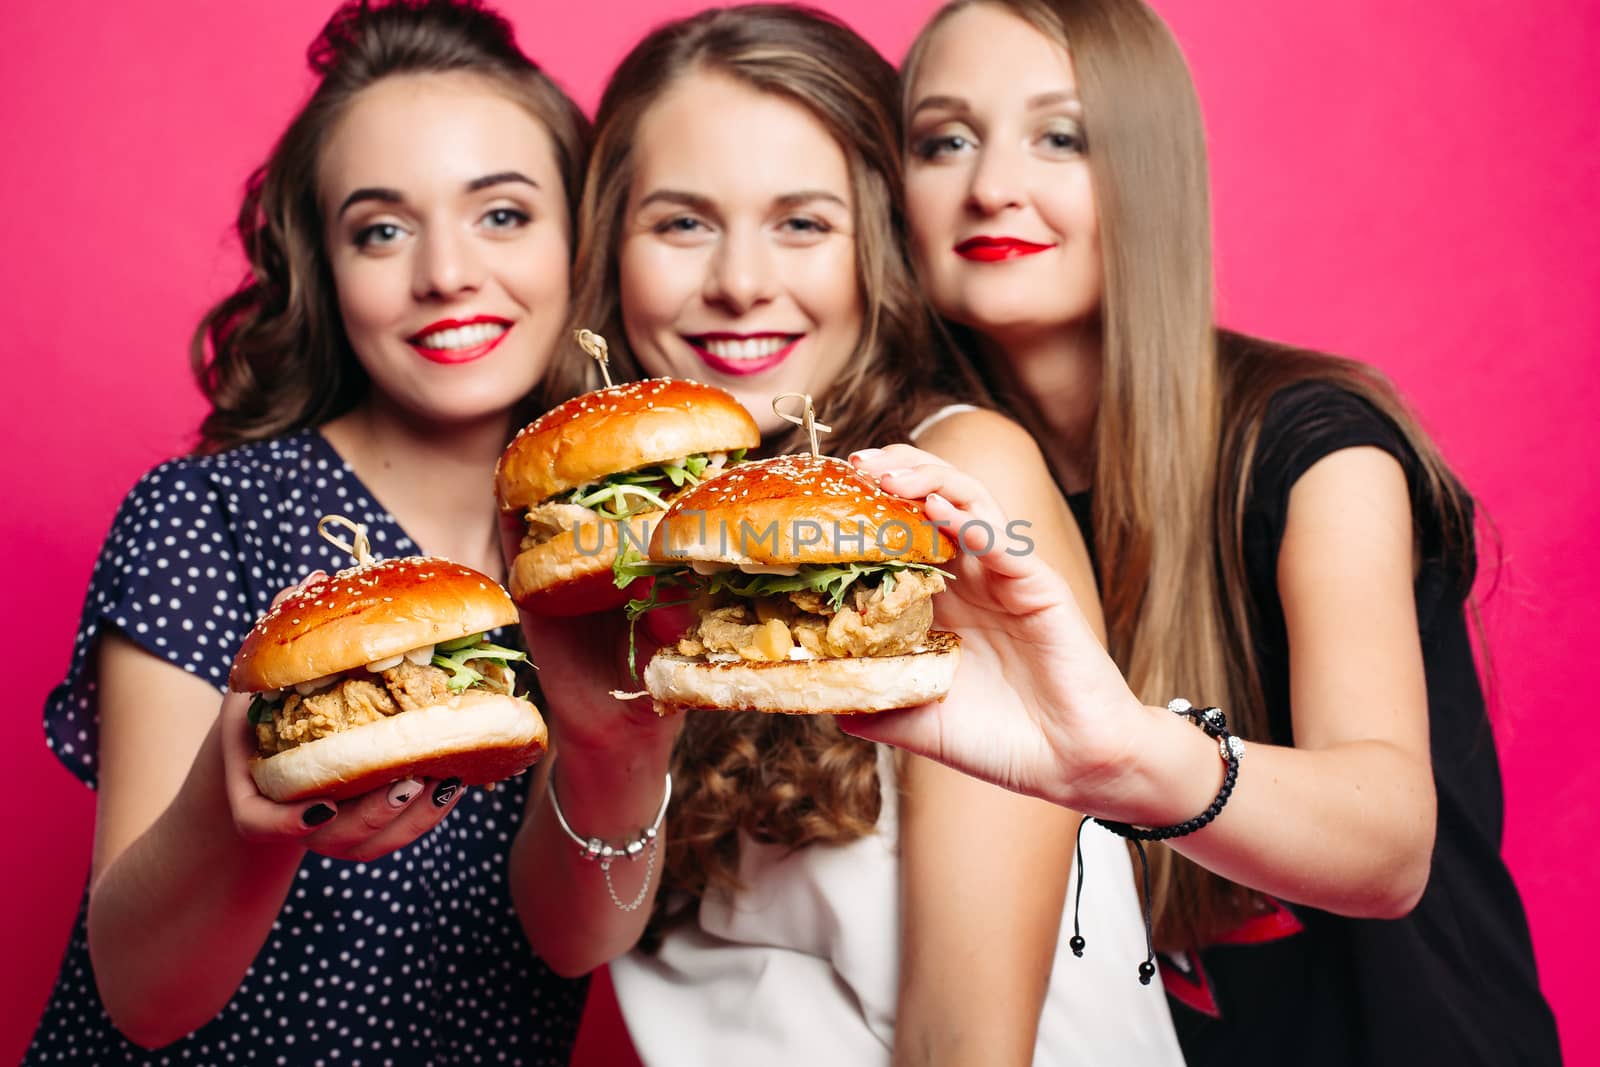 Portrait of beautiful ladies smiling at camera holding juicy delicious burgers in foreground. Fast food concept.